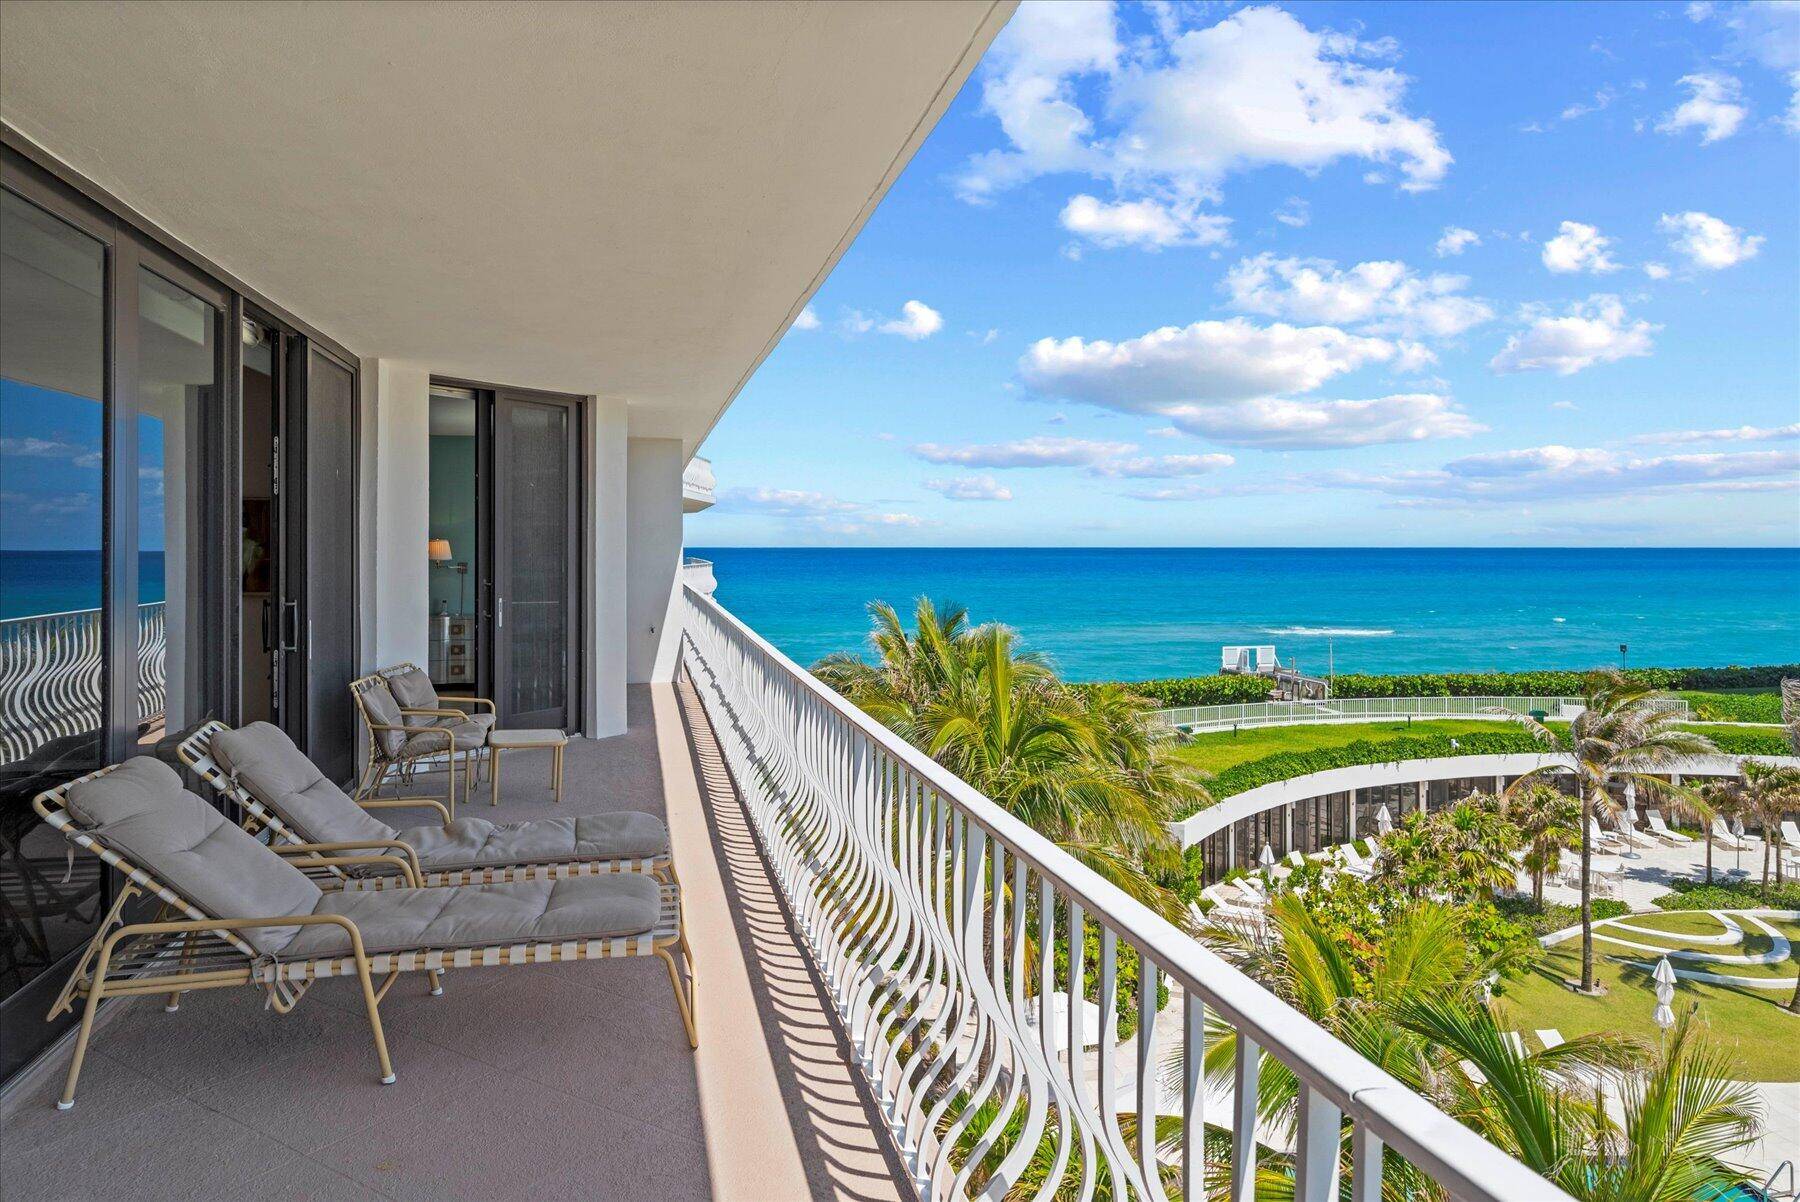 Enjoy luxurious oceanfront living in this spacious 2 bedrooms, 2.